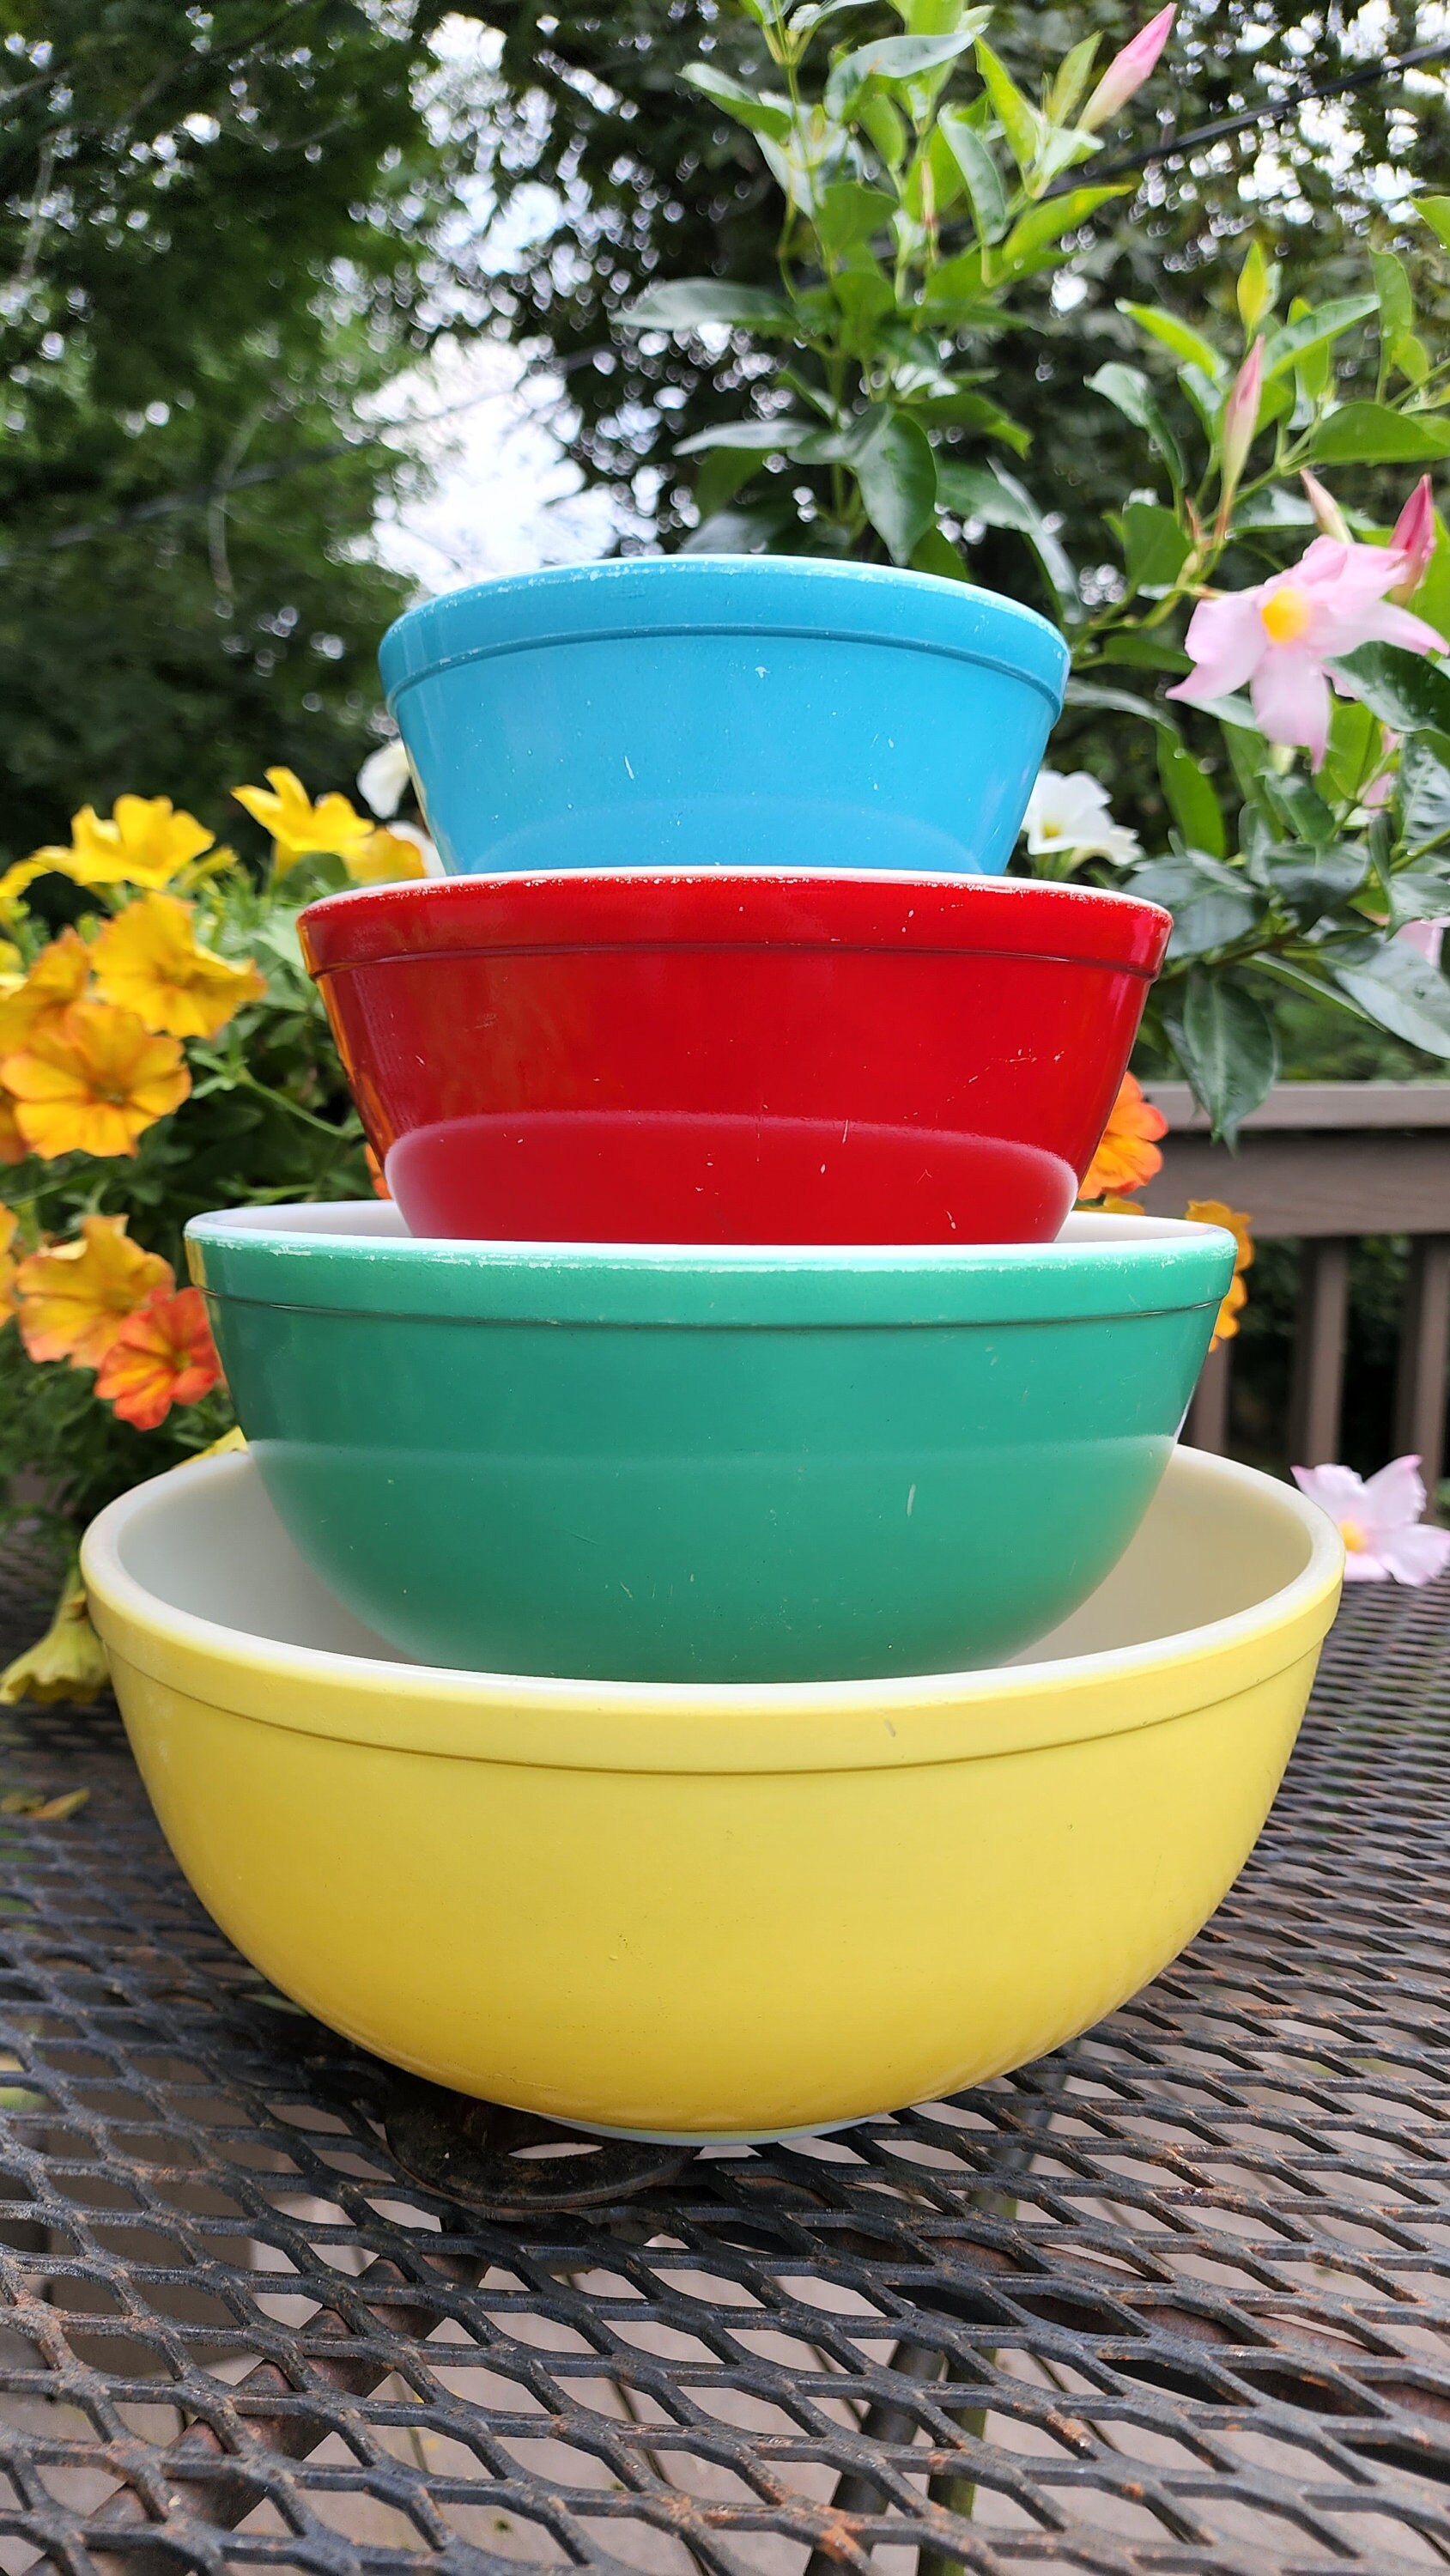 Full Set 4 PYREX Primary Color Mixing Bowls Vintage Pyrex Mixing Bowl Set  No Numbers Bowls Primitive 1940s Unnumbered Primary 